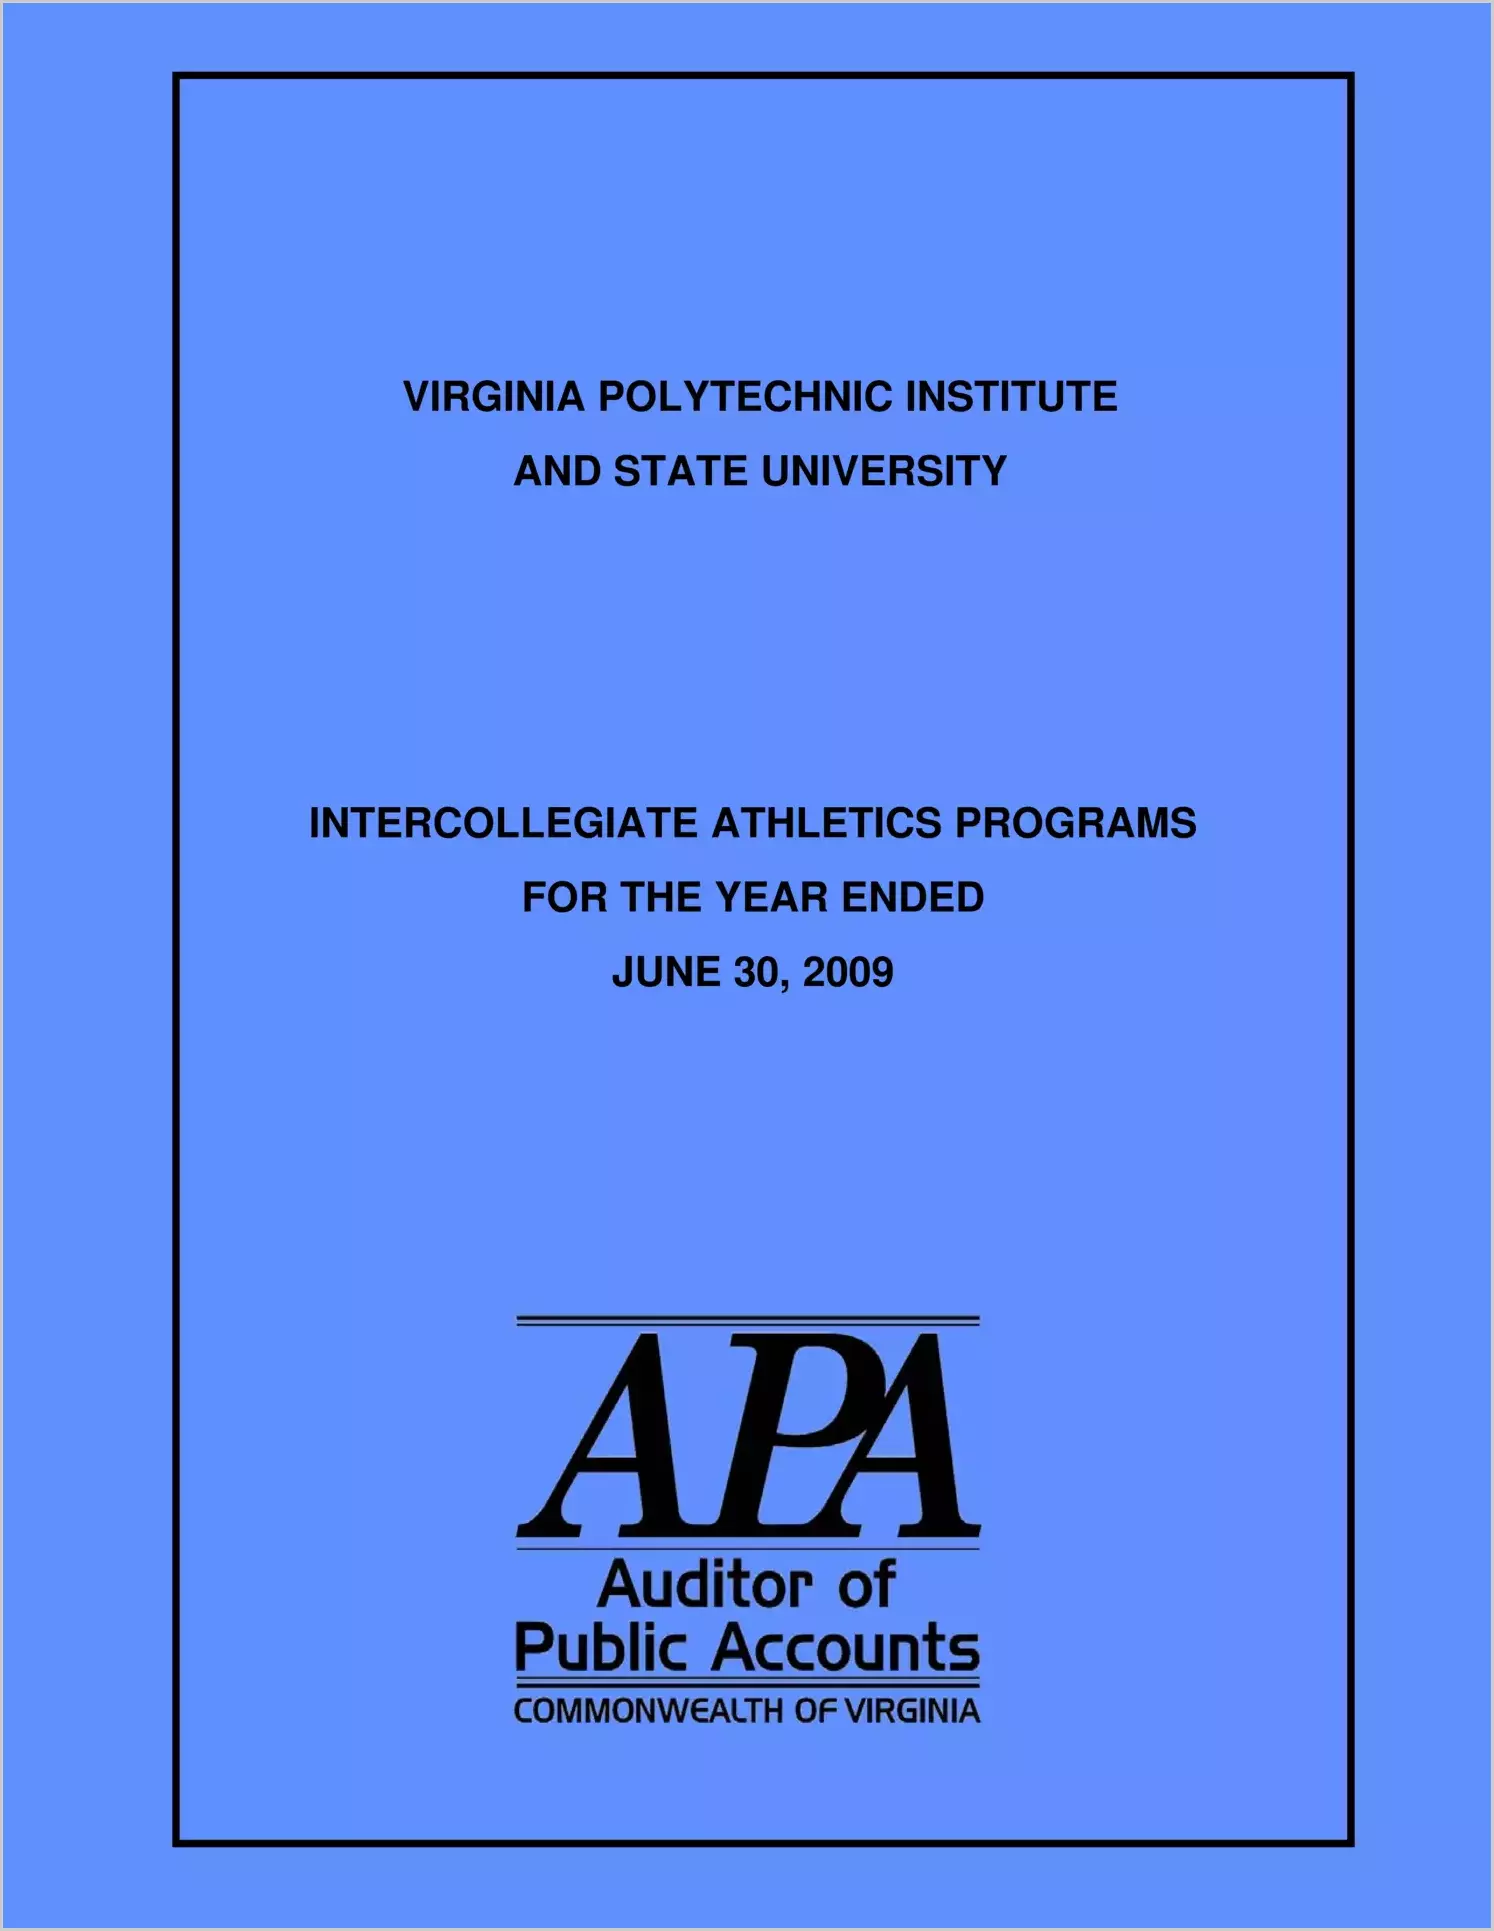 Virginia Polytechnic Institute and State University Intercollegiate Athletic Programs for the year ended June 30, 2009